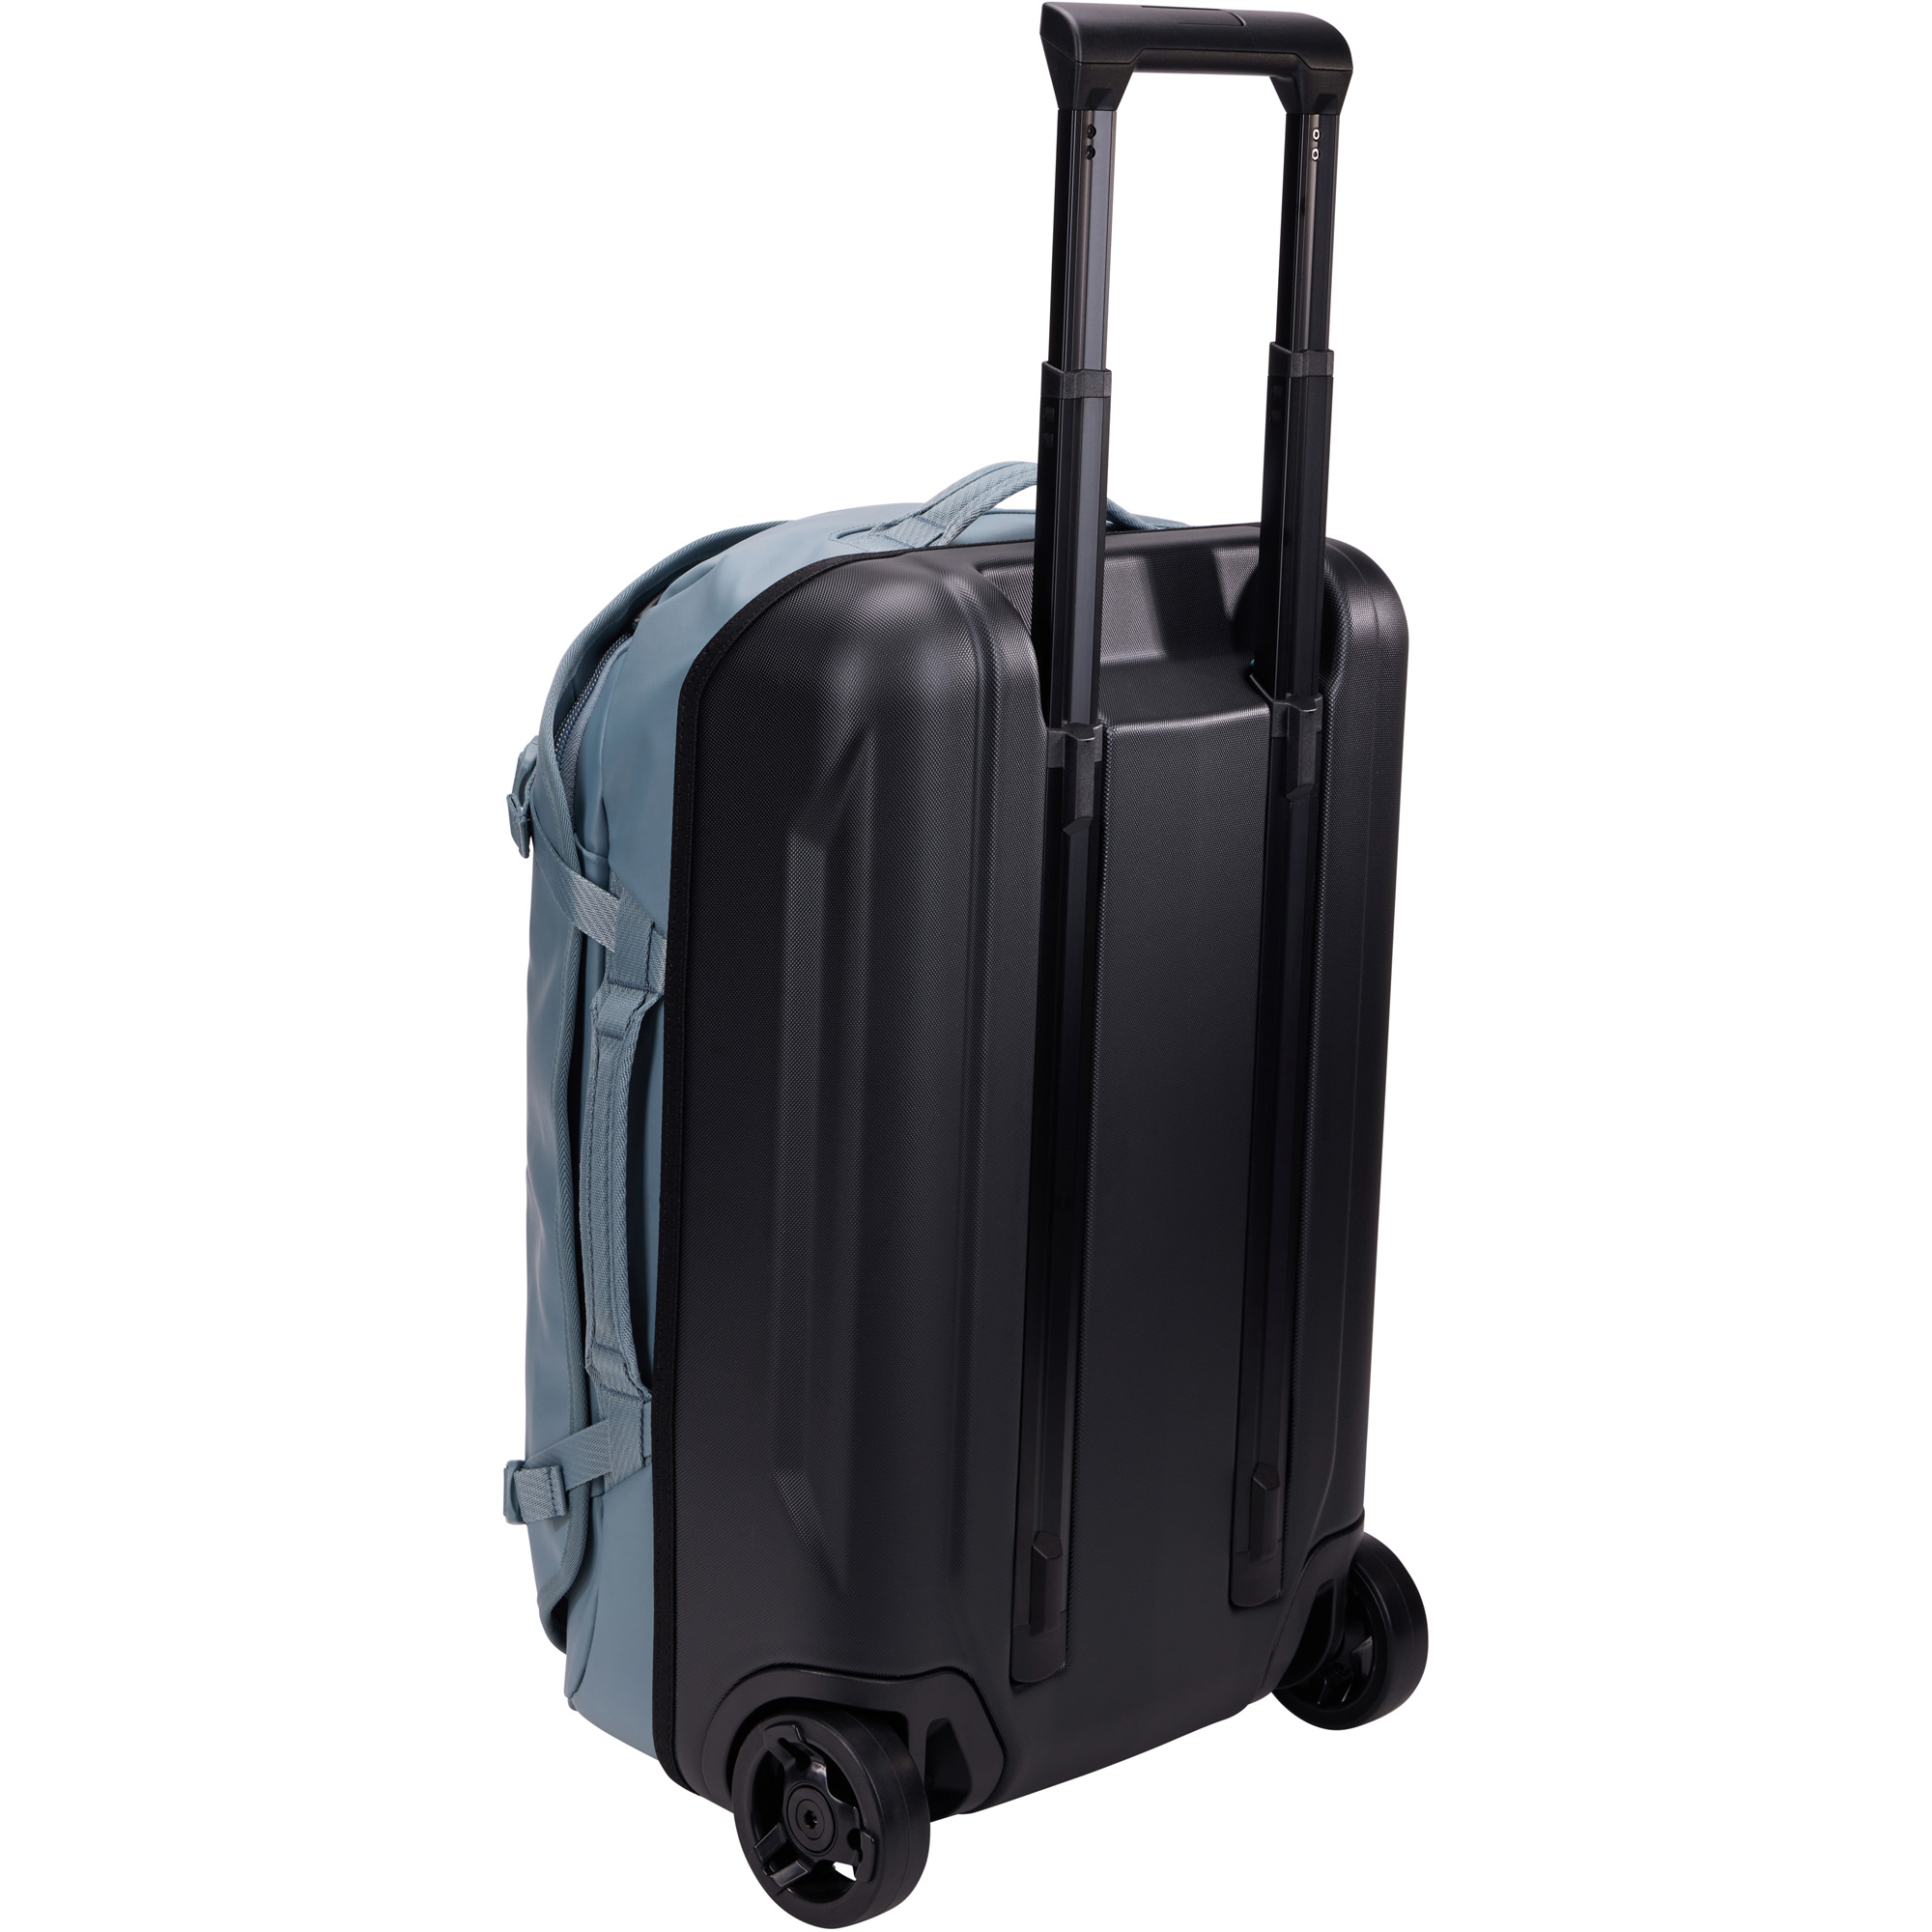 Thule Chasm 40L Carry-On Luggage